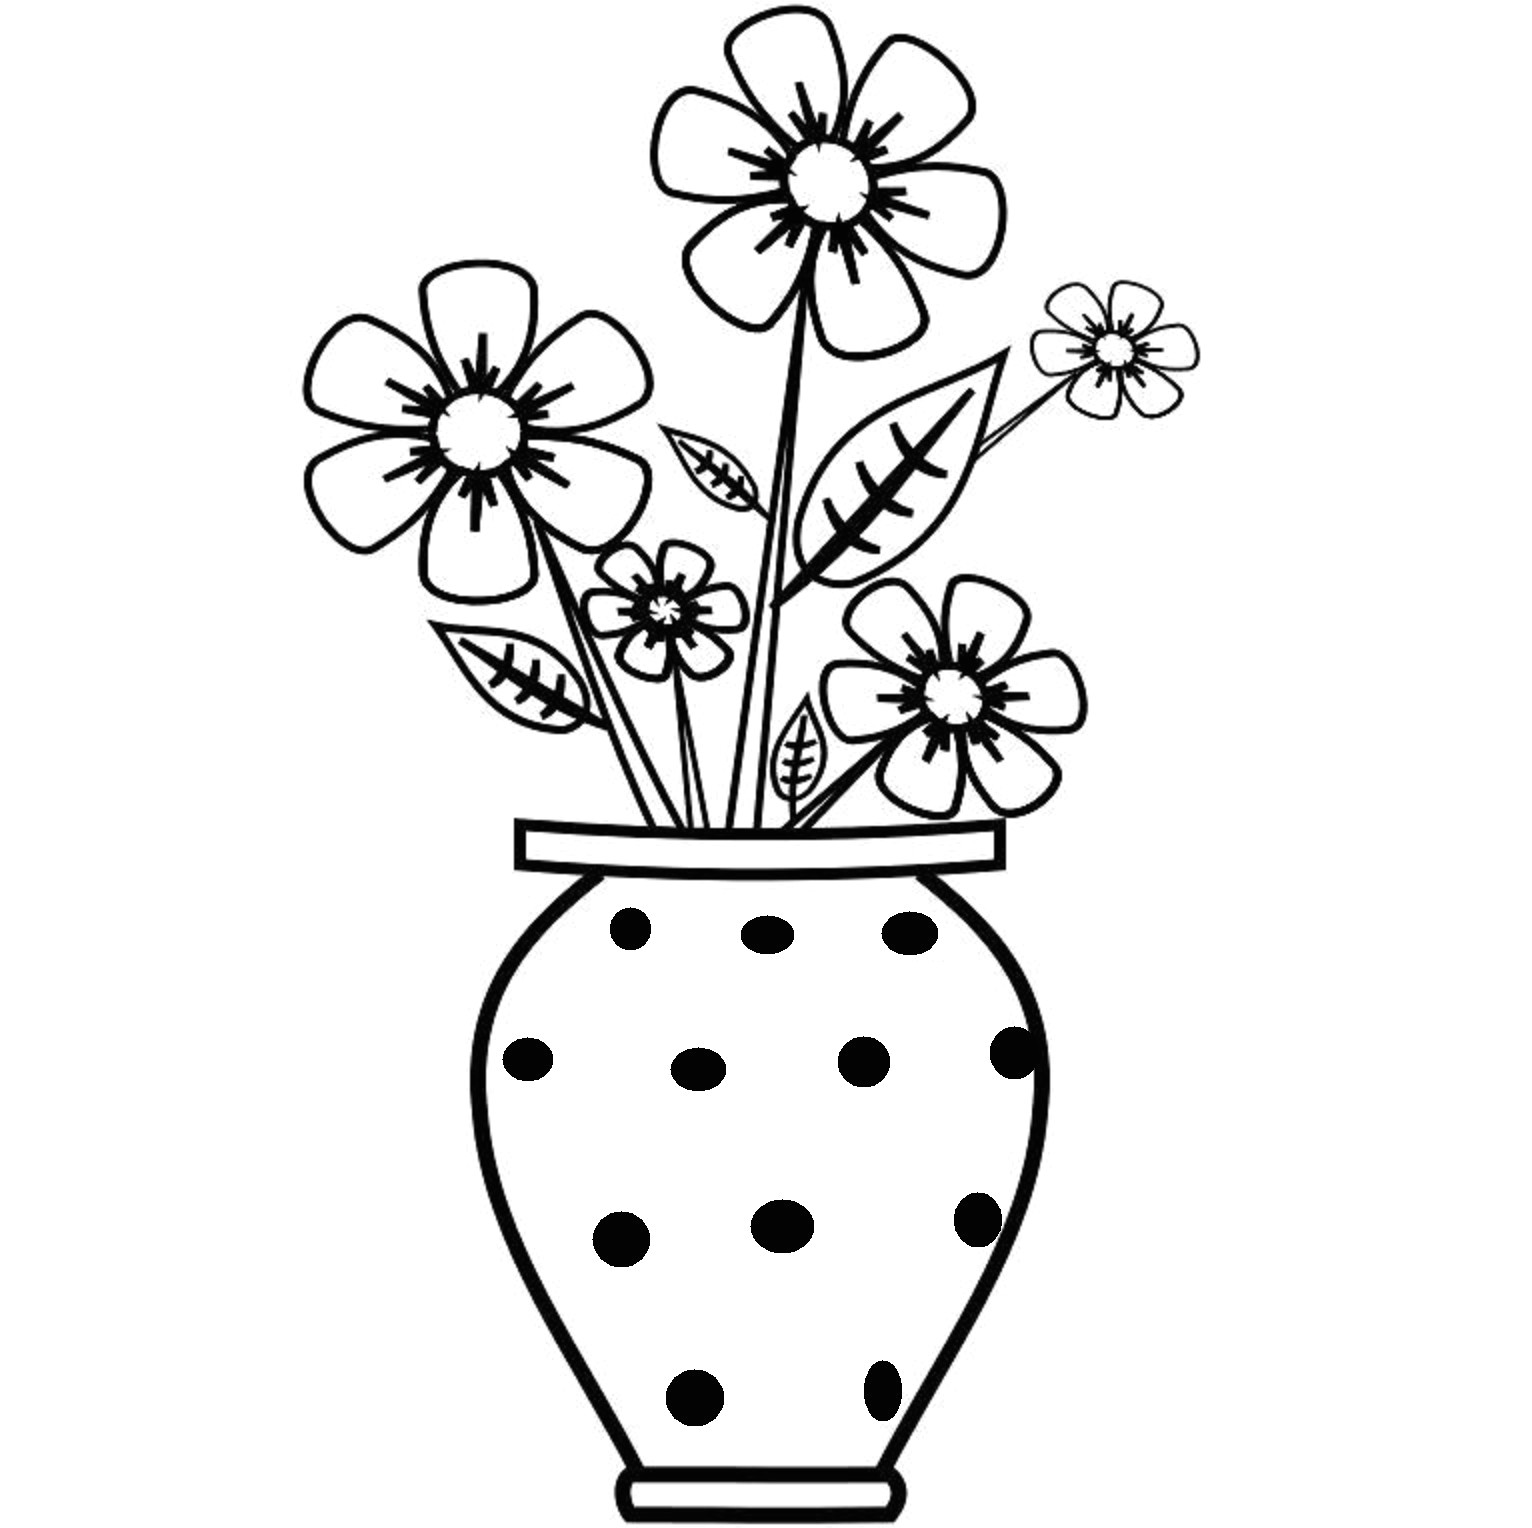 Drawing Of Easy Flower Pot Flowers to Draw Easy Step by Step Flower Pot for Drawing Sketches